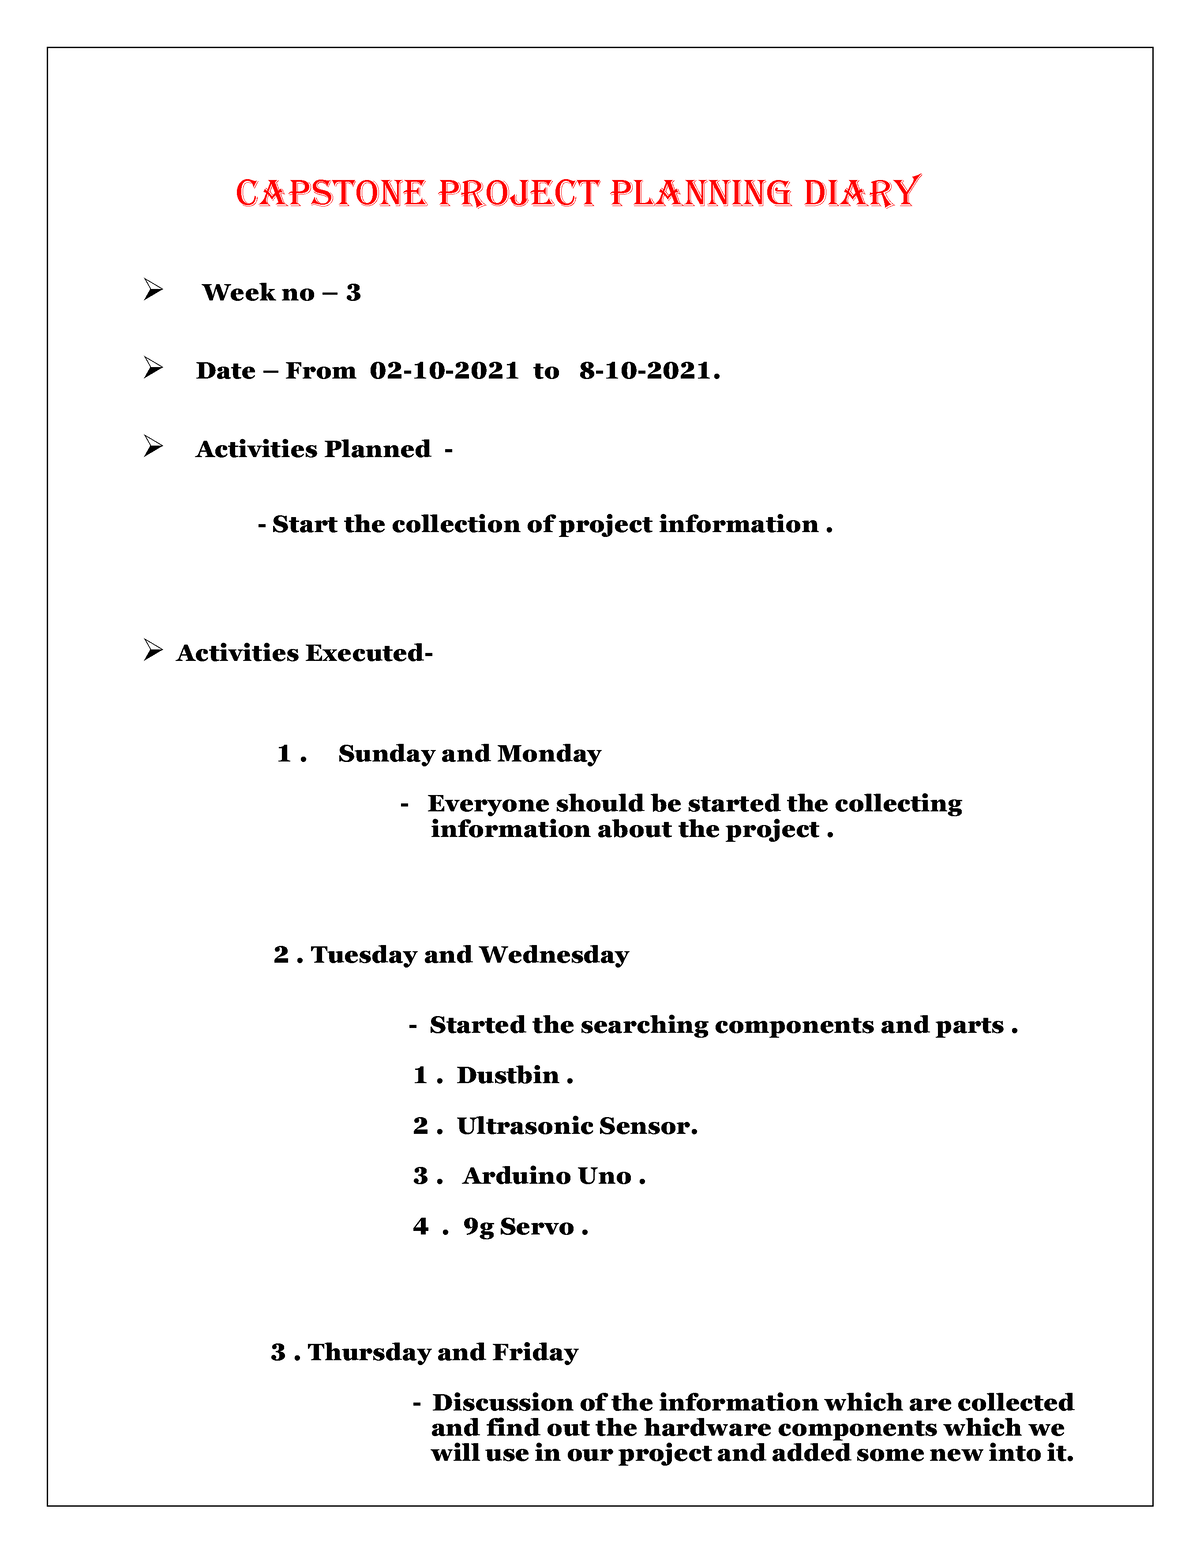 capstone project weekly diary